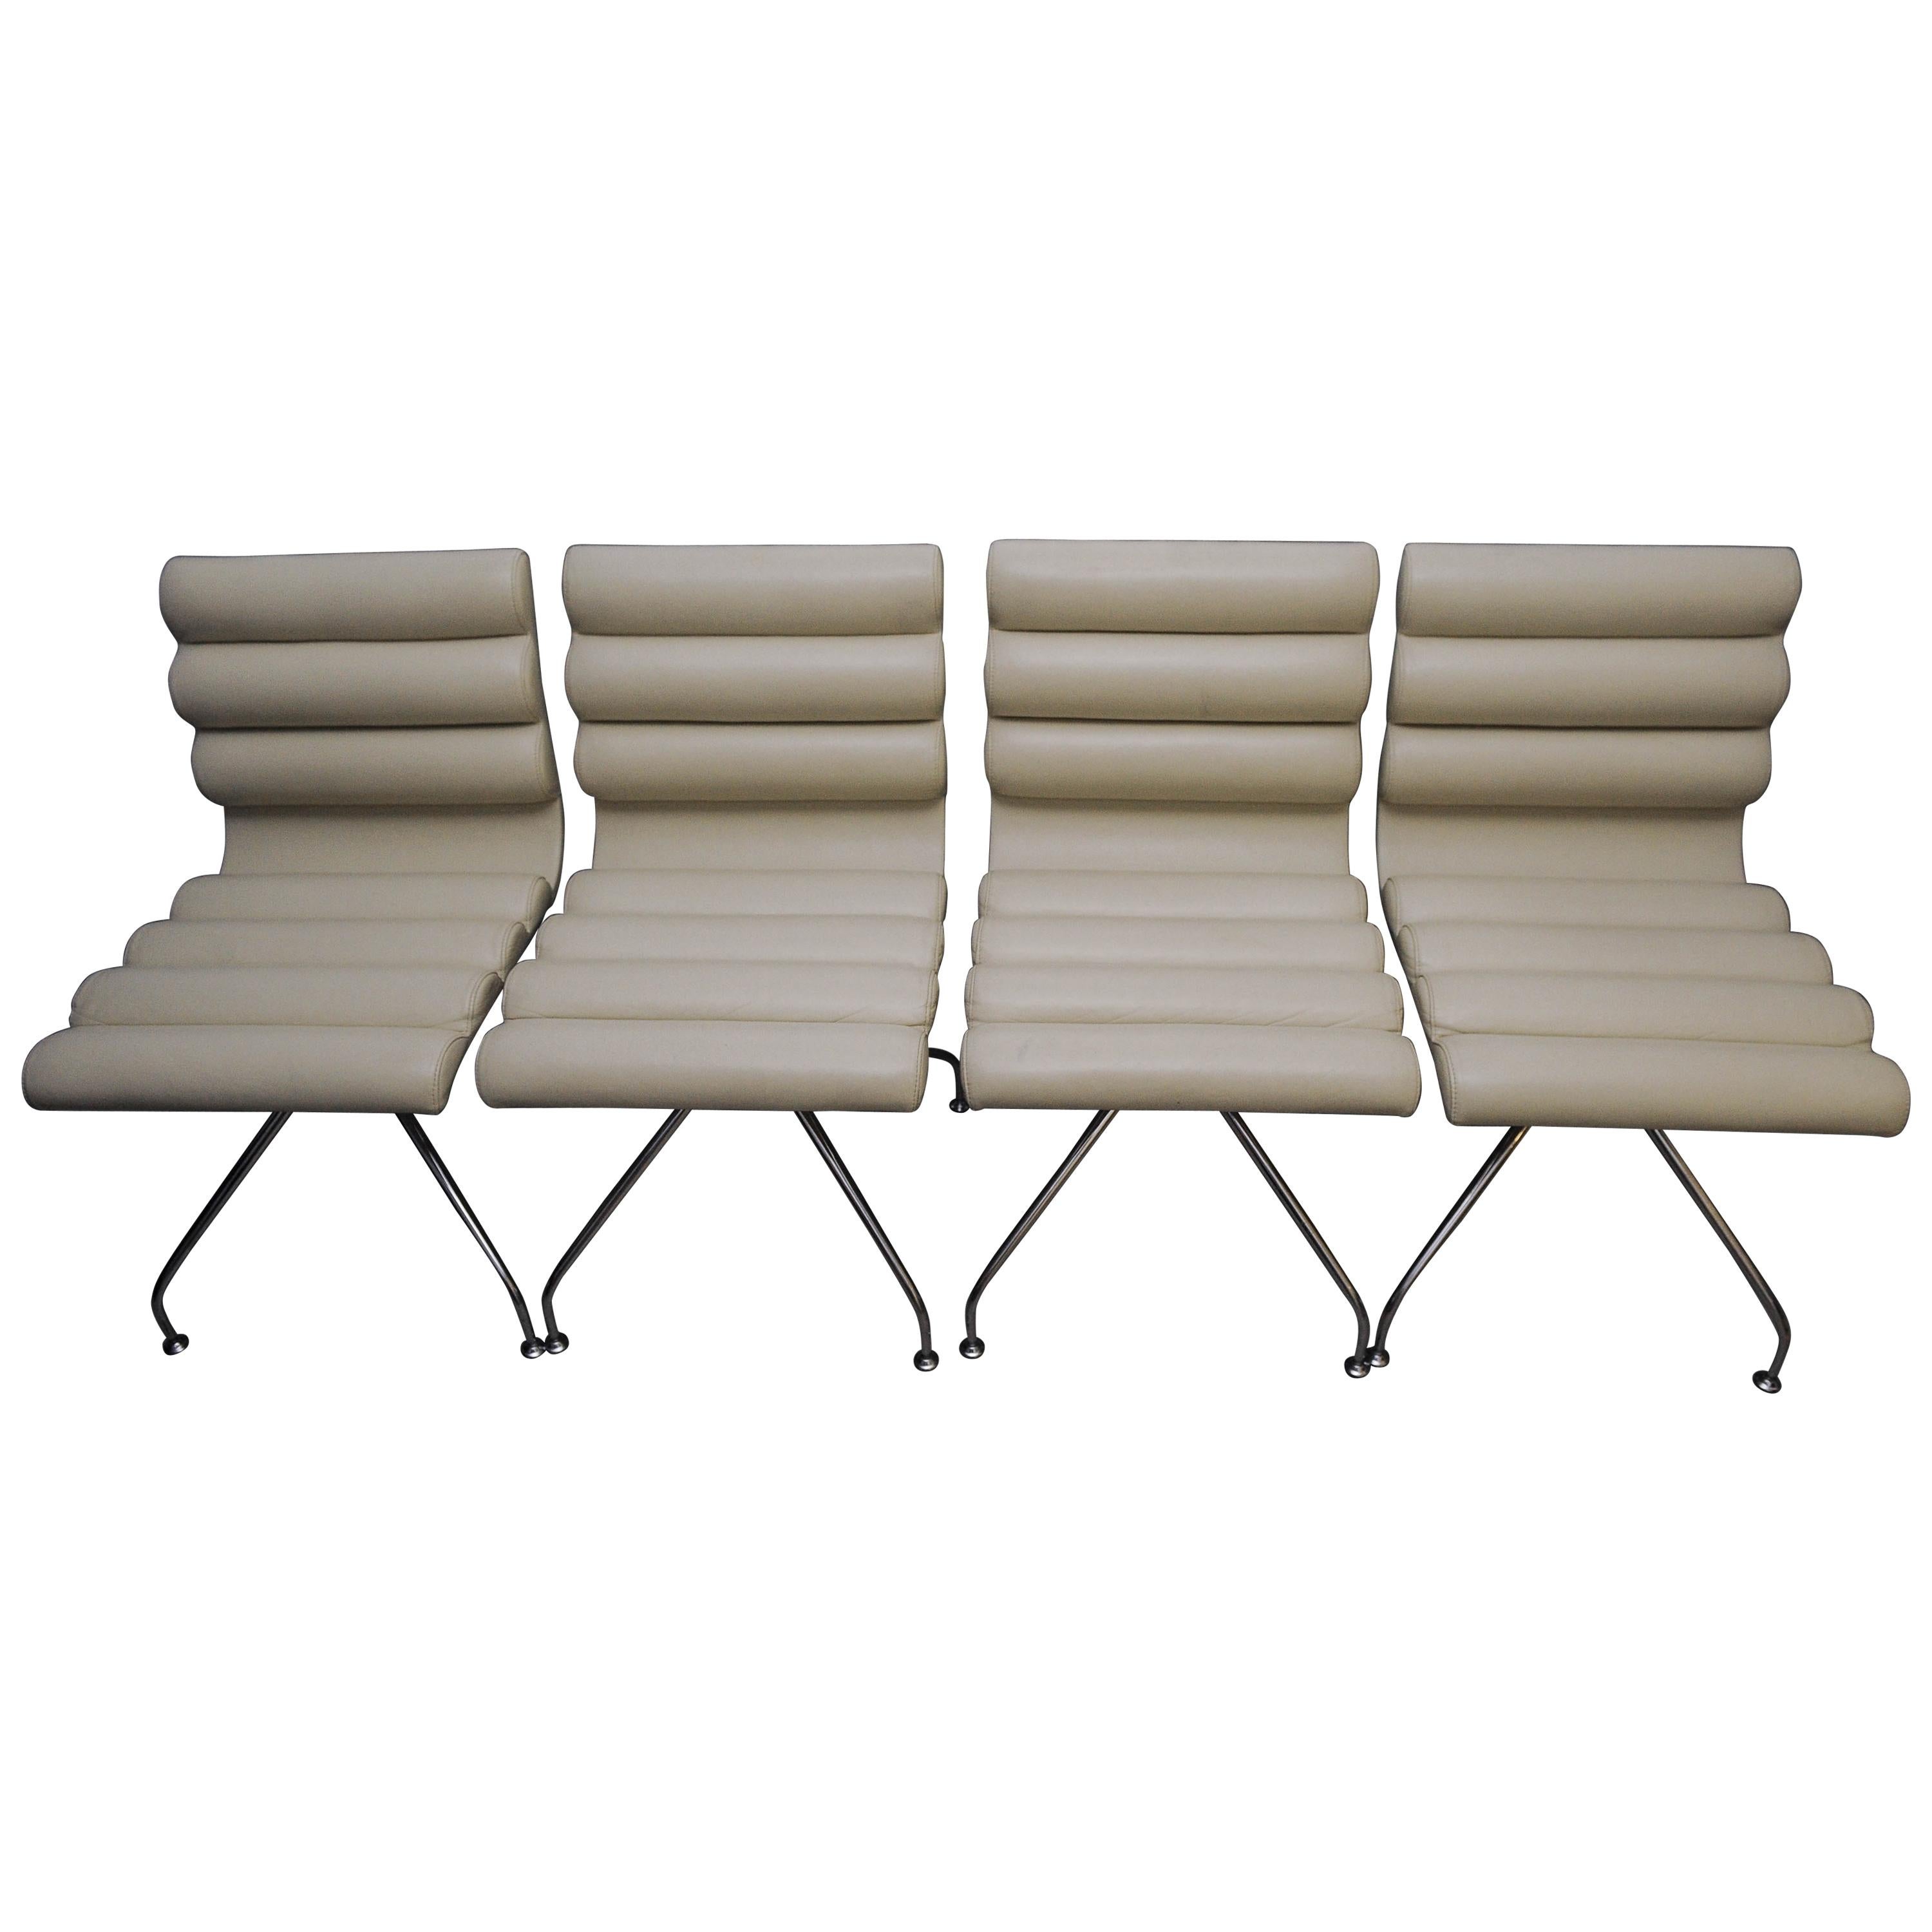 Giovanna Modonutti 'Giofra' for Frag, a Set of 4 White Leather 'Canouan' Chairs For Sale